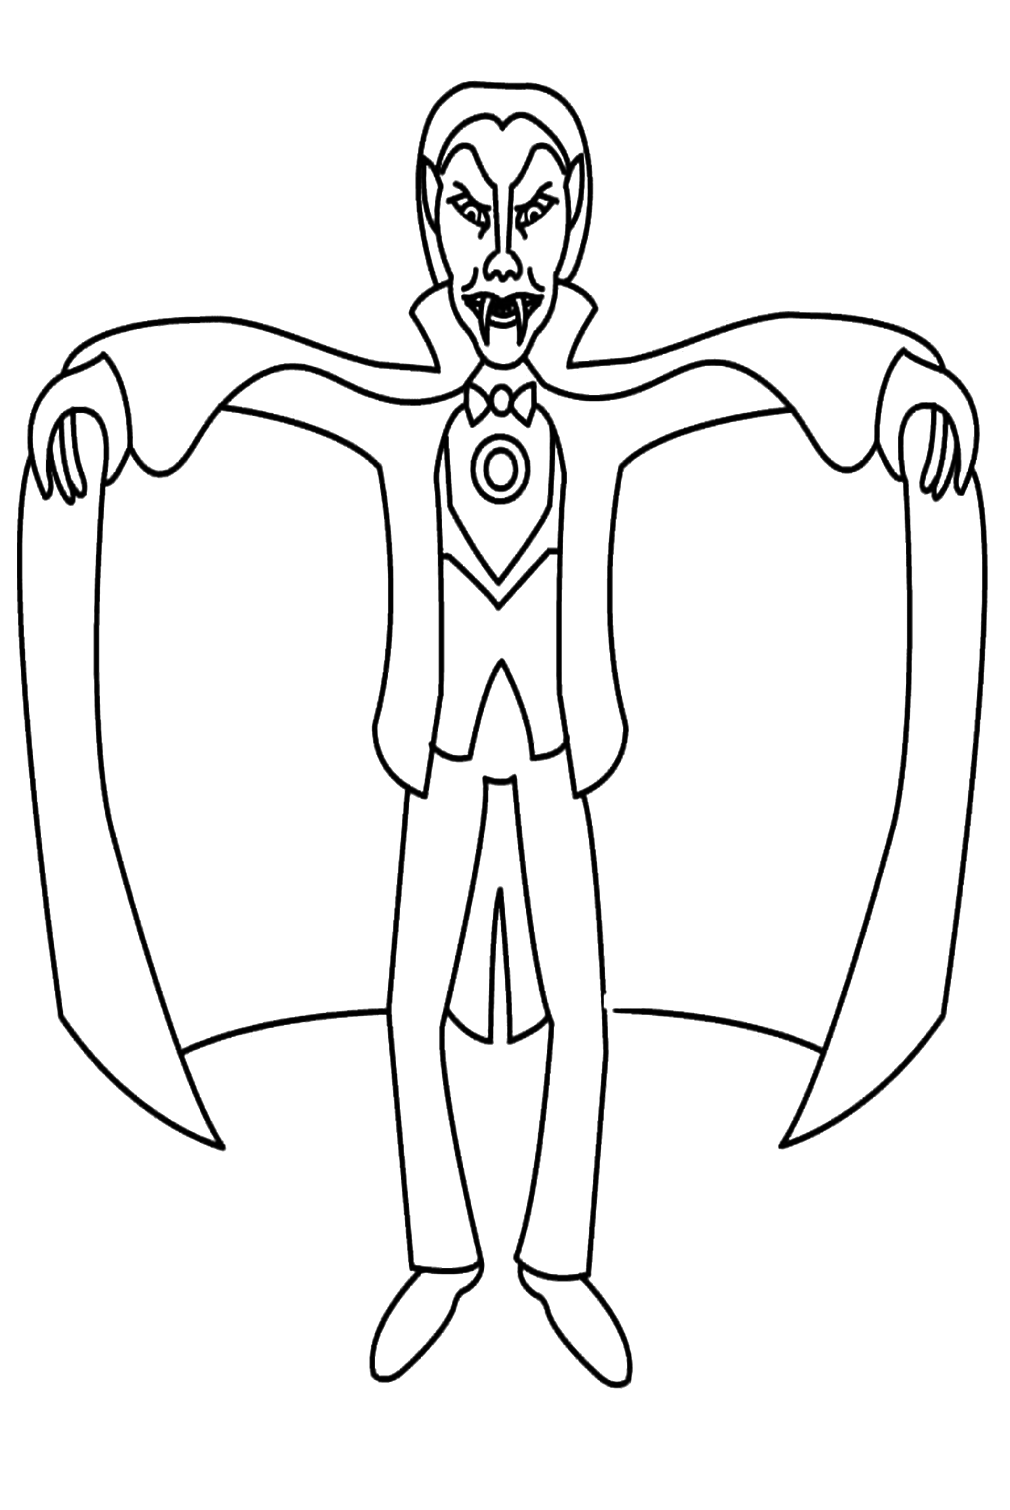 Gothnic Vampire Coloring Page - Vampire Coloring Pages - Coloring Pages ...